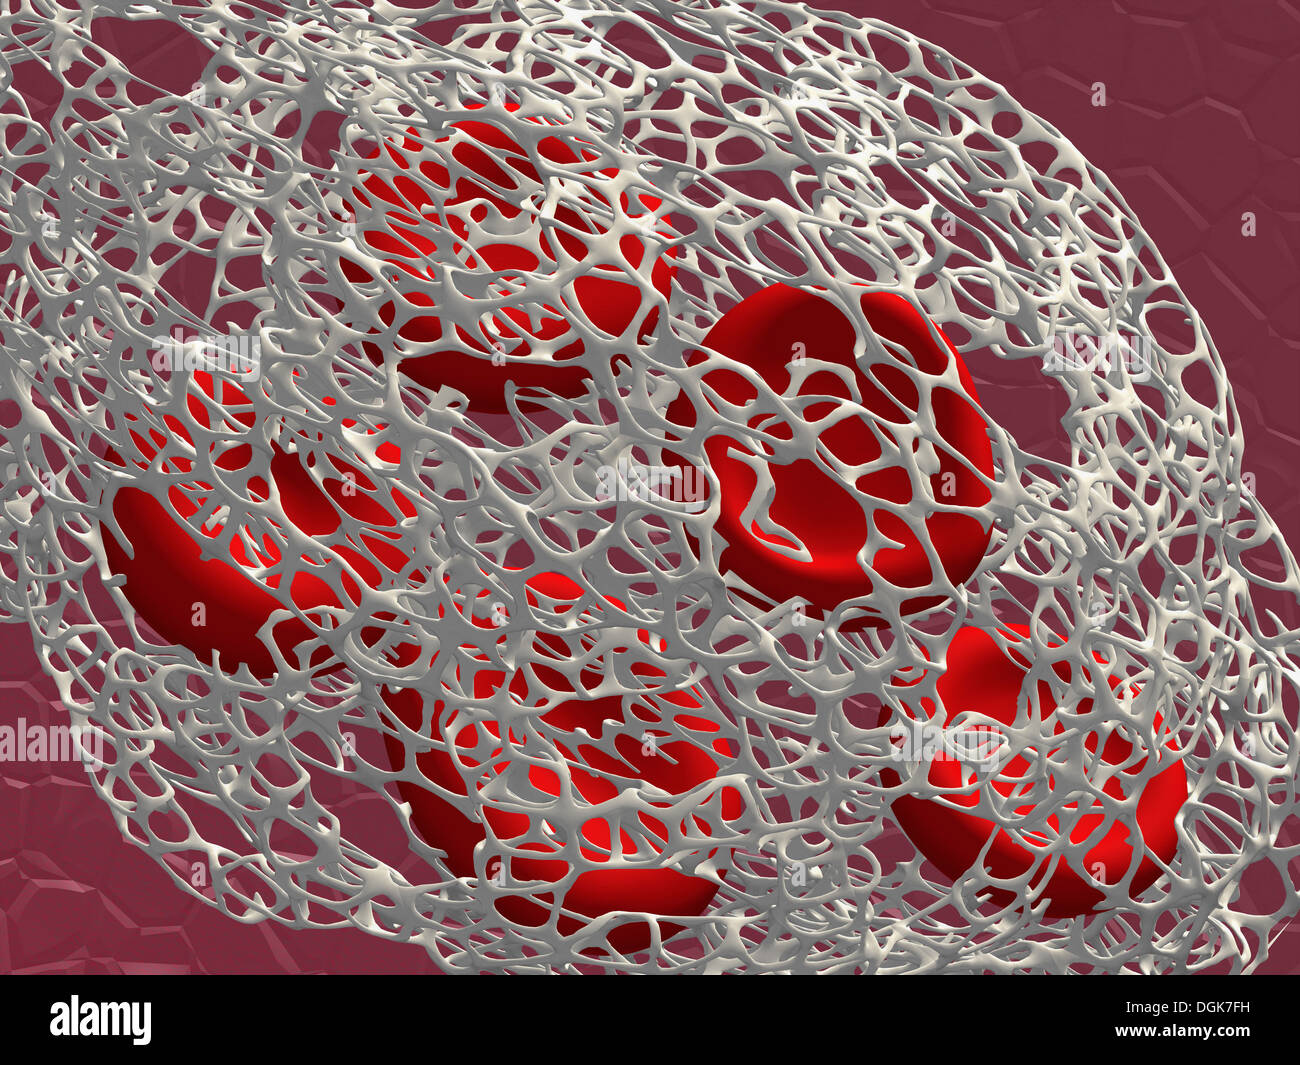 Human red blood cells within a fibrin meshwork Stock Photo